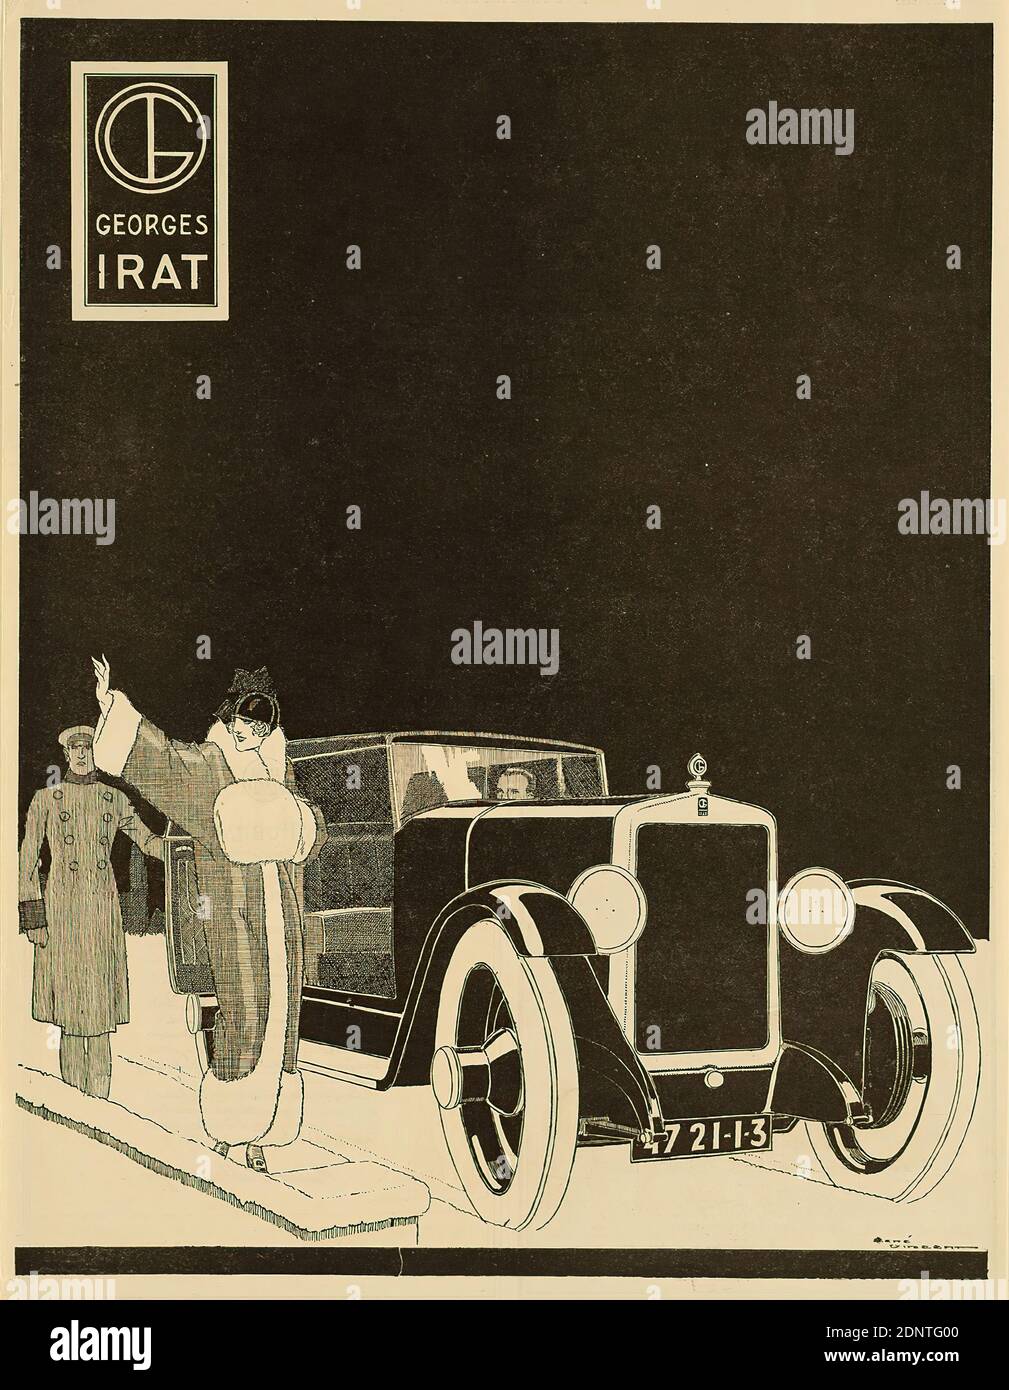 René Vincent, Georges Irat, advertisement in the magazine L'Illustration, line etching, total: height: 39.5 cm; width: 28.5 cm, signed: René Vincent, advertisements, Product and business advertising (print graphics), Car, automobile, woman, Art Déco Stock Photo